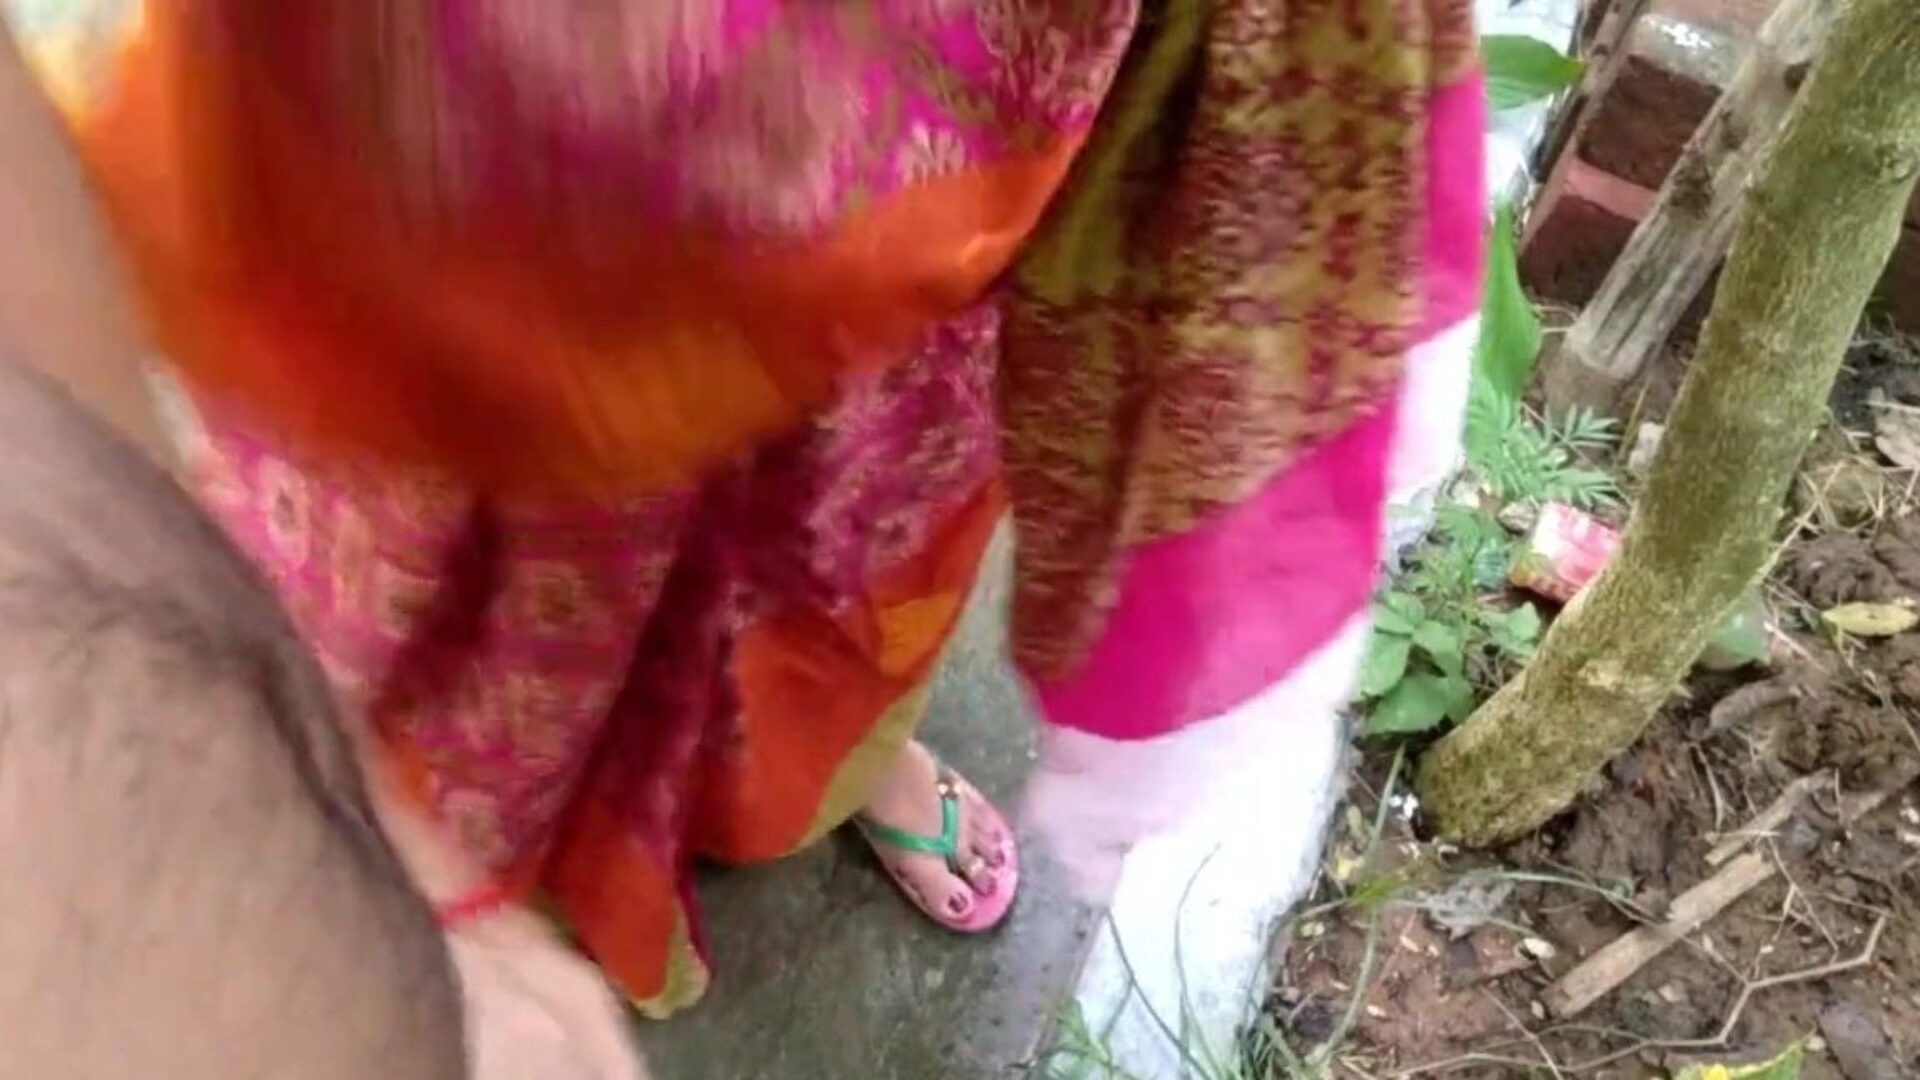 Everbest Outdoor Sex with Stranger Bhabhi: Free HD Porn 75 Watch Everbest Outdoor Sex with Stranger Bhabhi movie scene on xHamster - the ultimate database of free Asian Indian HD gonzo porno tube videos